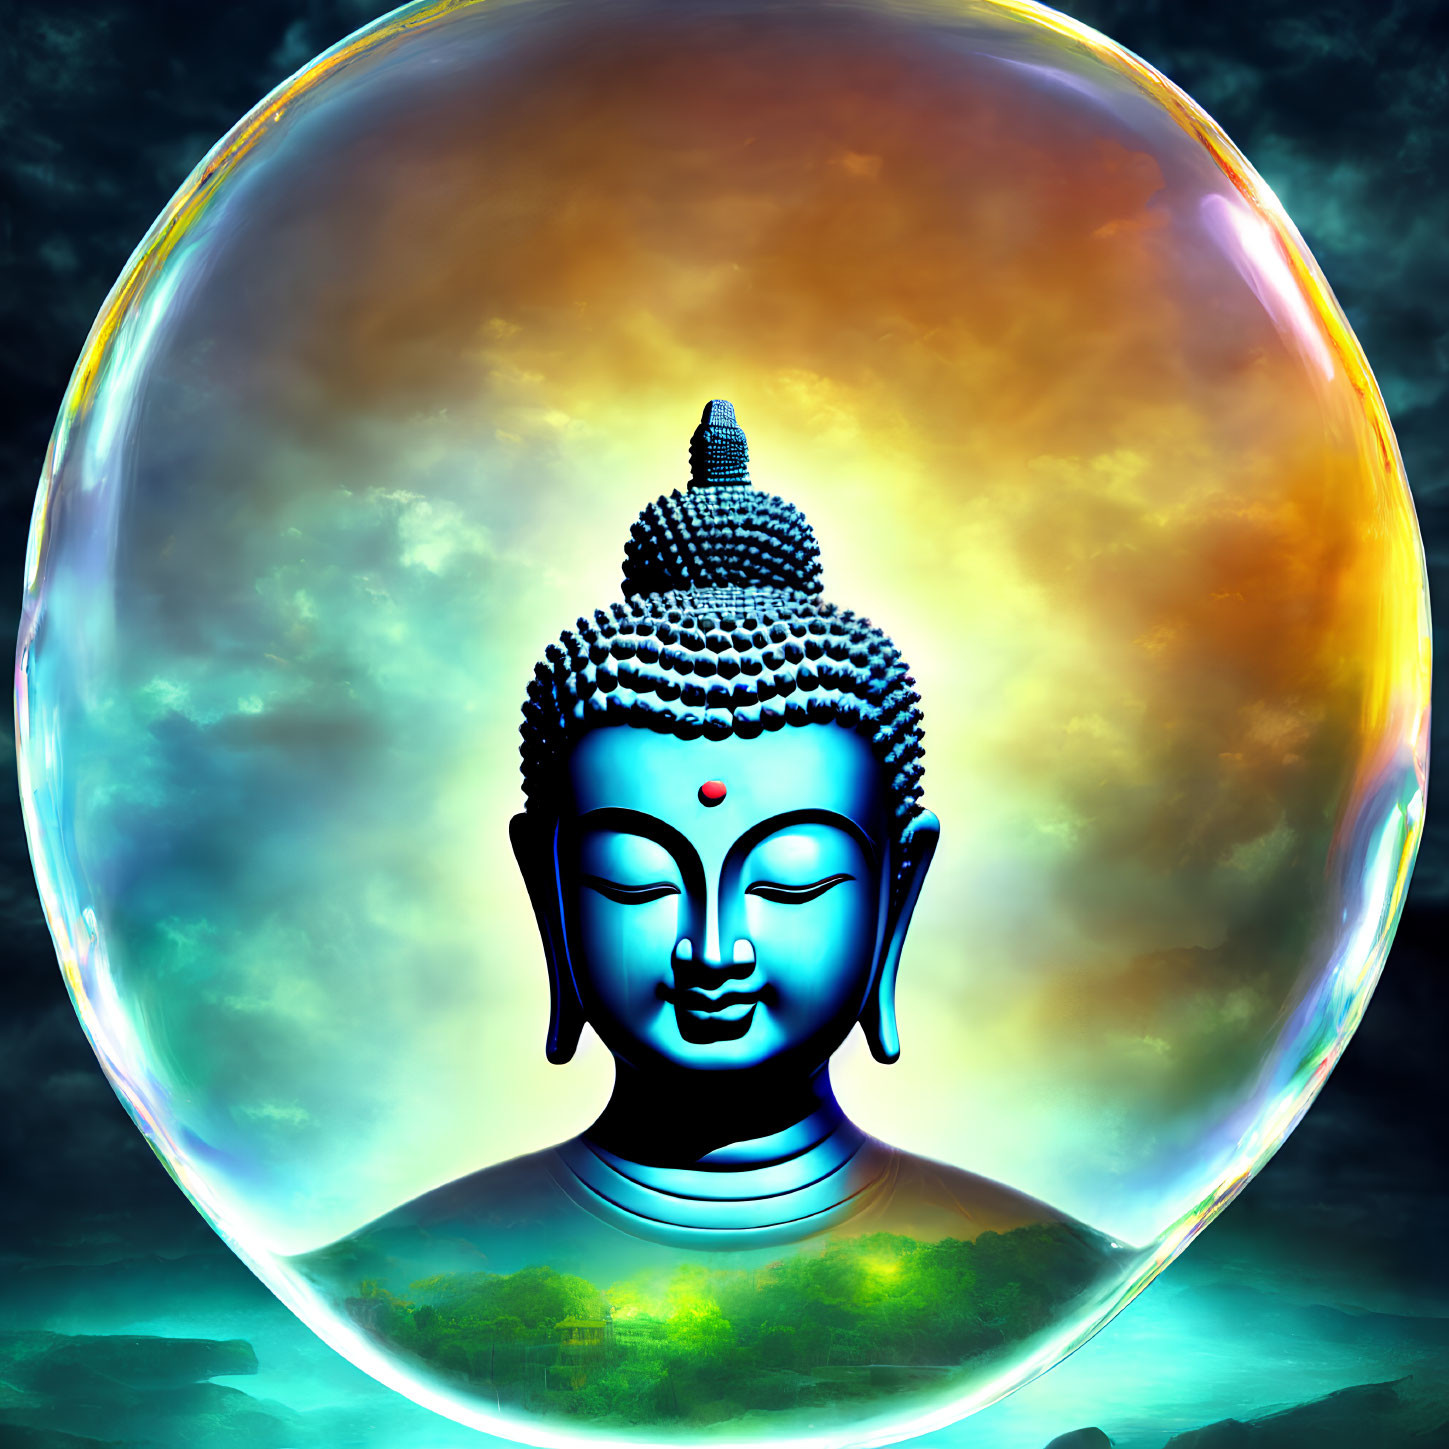 Colorful Bubble Surrounding Buddhist Statue Head on Blue Background with Floating Rocks